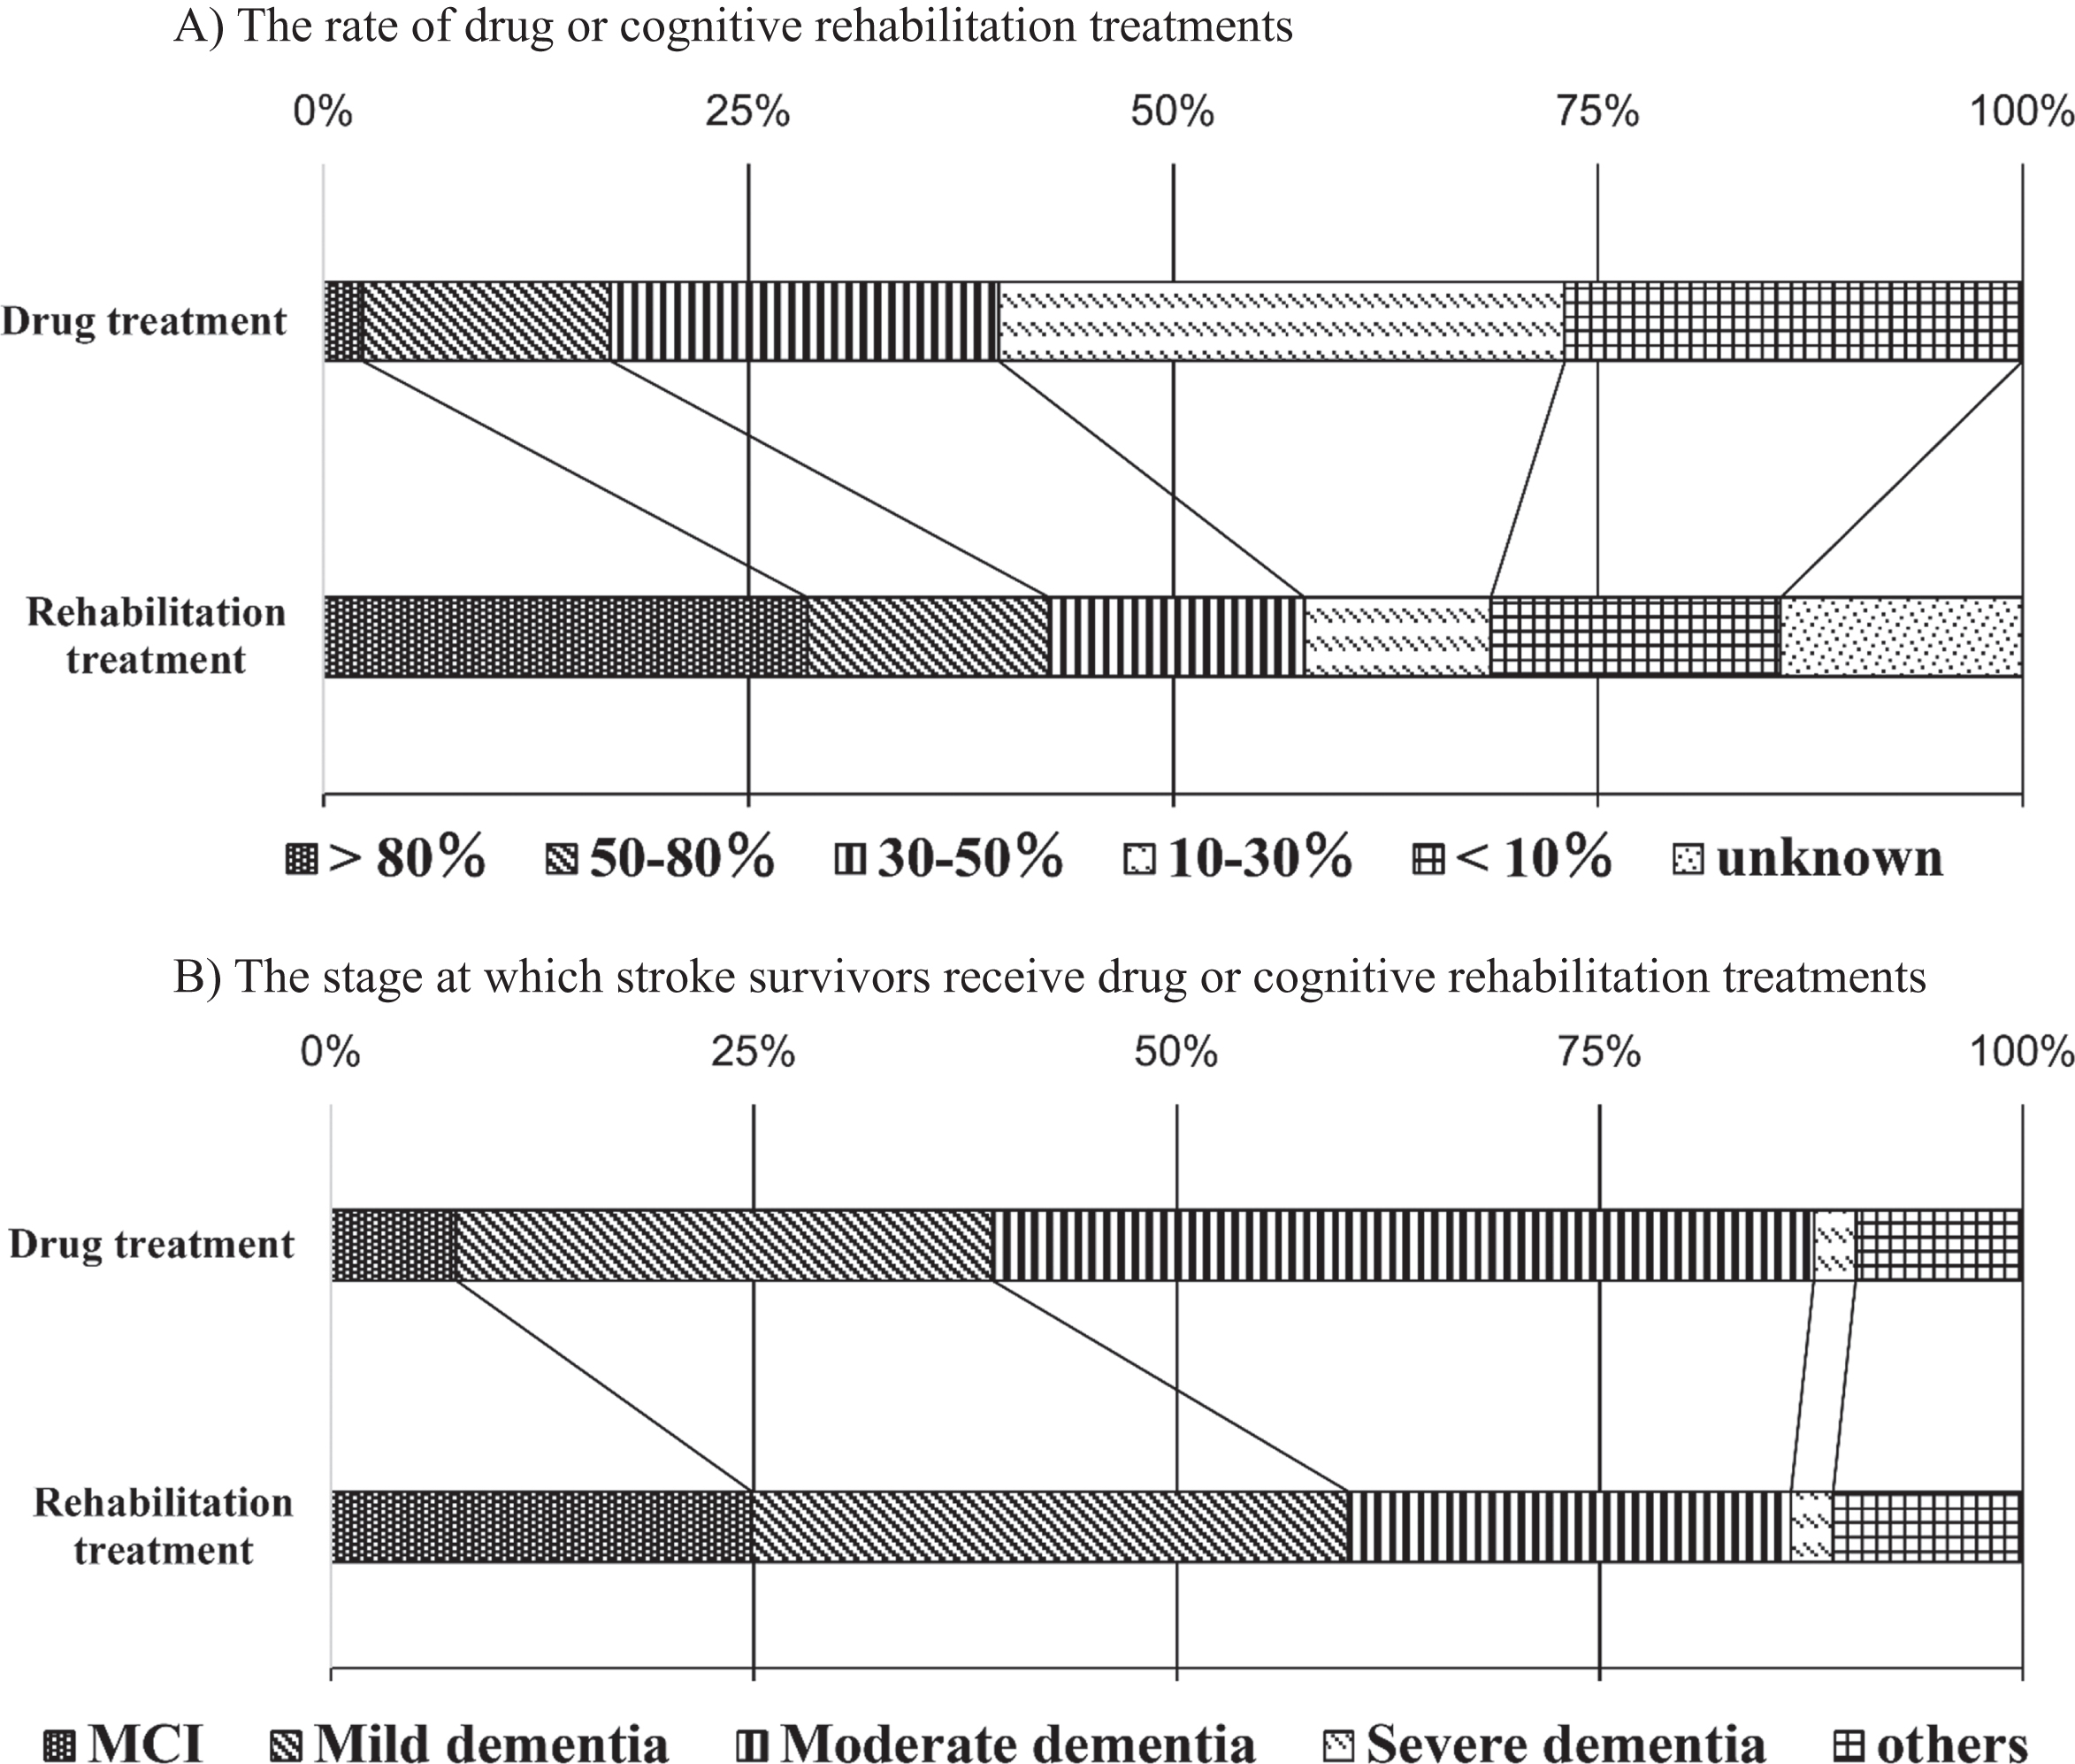 Treatment of dementia after stroke. A) The rate of stroke survivors who received drug treatments was > 80% (2.3%), 50–80% (14.6%), 30–50% (22.8%), 10–30% (33.3%), <10% (27.0%), and unknown (0%). The rate of stroke survivors who received cognitive rehabilitation treatments was > 80% (28.5%), 50–80% (14.2%), 30–50% (15.0%), 10–30% (11.0%), <10% (17.1%), and unknown (14.2%). Cognitive rehabilitation treatment was undertaken significantly more often and in more than half the patients (42.7%) compared with drug treatment (16.9%) (p < 0.01). B) The stages of cognitive impairment at which stroke survivors who received drug treatments was mild cognitive impairment (MCI) (7.4%), mild dementia (31.7%), moderate dementia (48.5%), severe dementia (2.5%), and other (9.9%). The stages of cognitive impairment at which stroke survivors who received cognitive rehabilitation treatments were MCI (24.9%), mild dementia (35.3%), moderate dementia (26.1%), severe dementia (2.5%), and other (11.2%). The rate of cognitive rehabilitation for patients with MCI and mild dementia (60.2%) was significantly higher than that of drug treatment (39.1%) (p < 0.01).